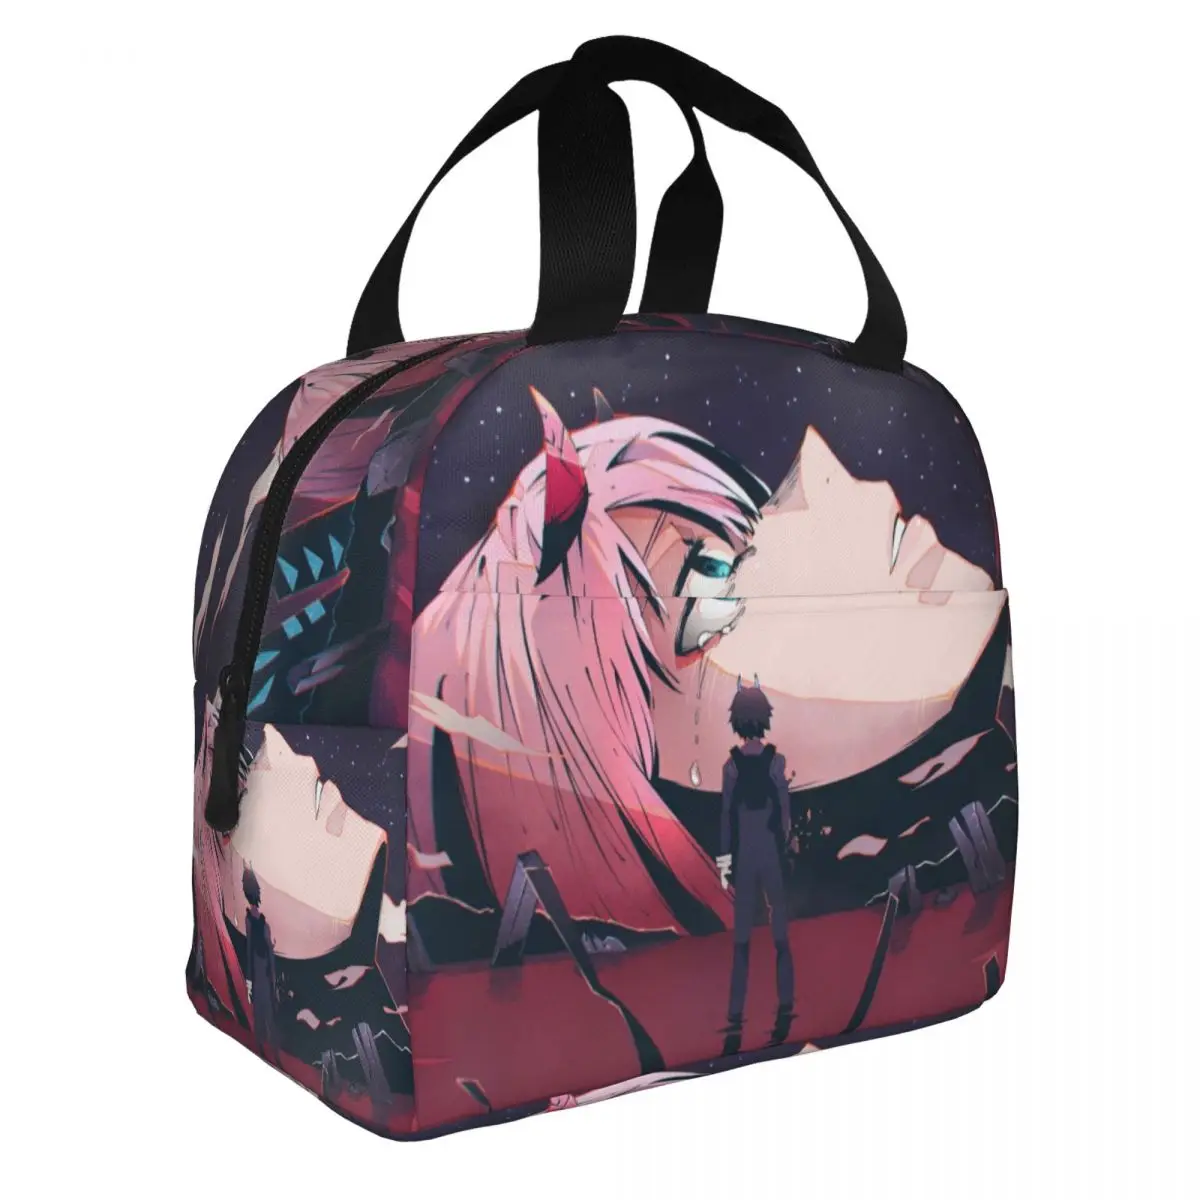 Anime - Darling In The FranXX Lunch Bento Bags Portable Aluminum Foil thickened Thermal Cloth Lunch Bag for Women Men Boy